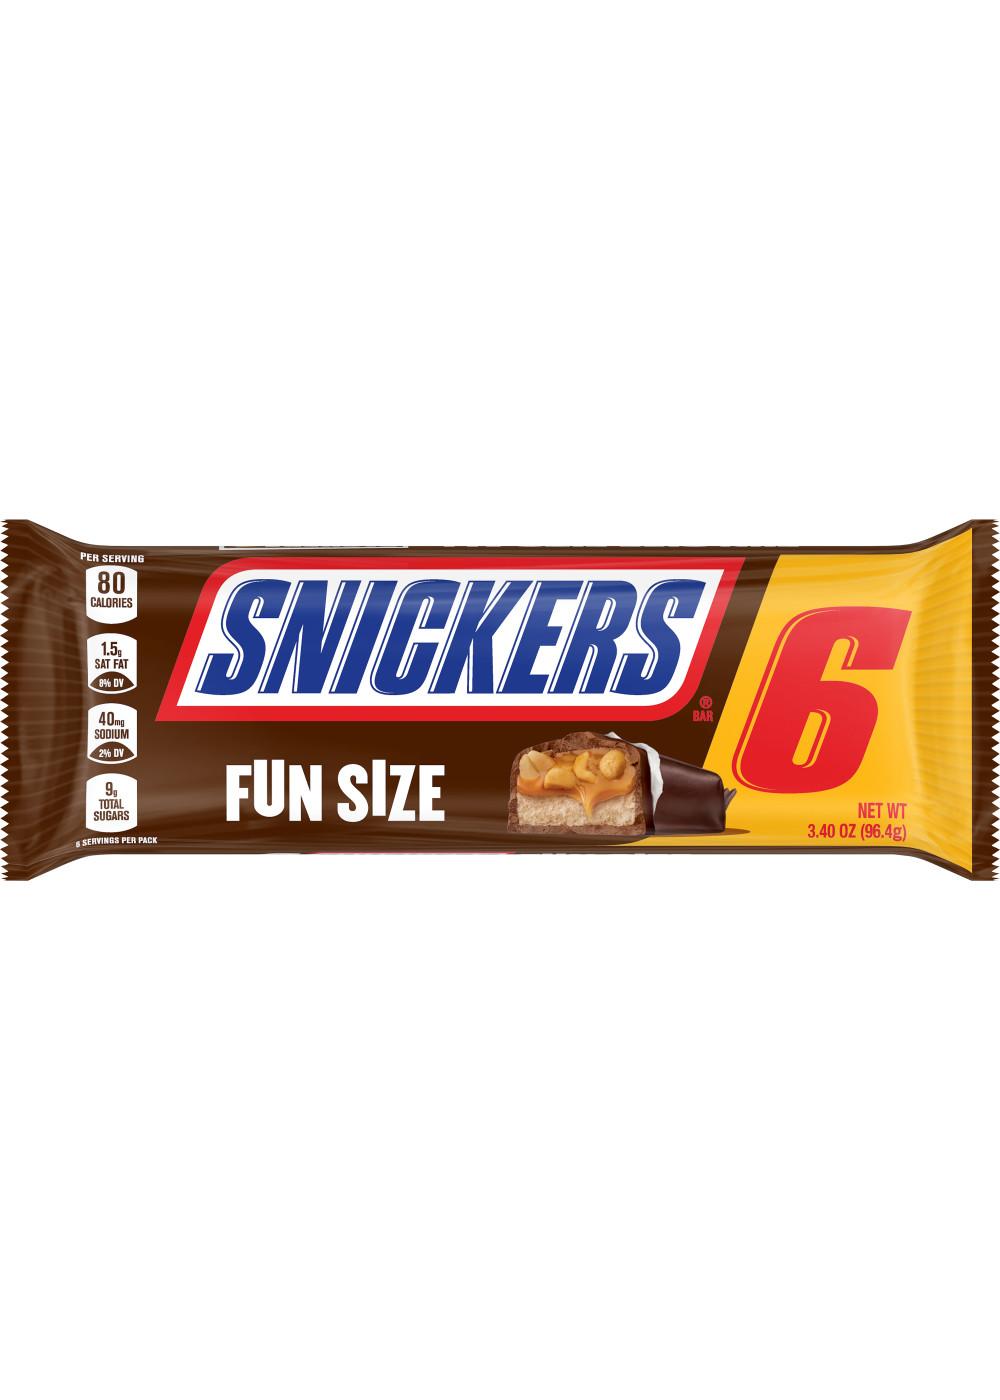 Snickers Fun Size Chocolate Candy Bars; image 1 of 7